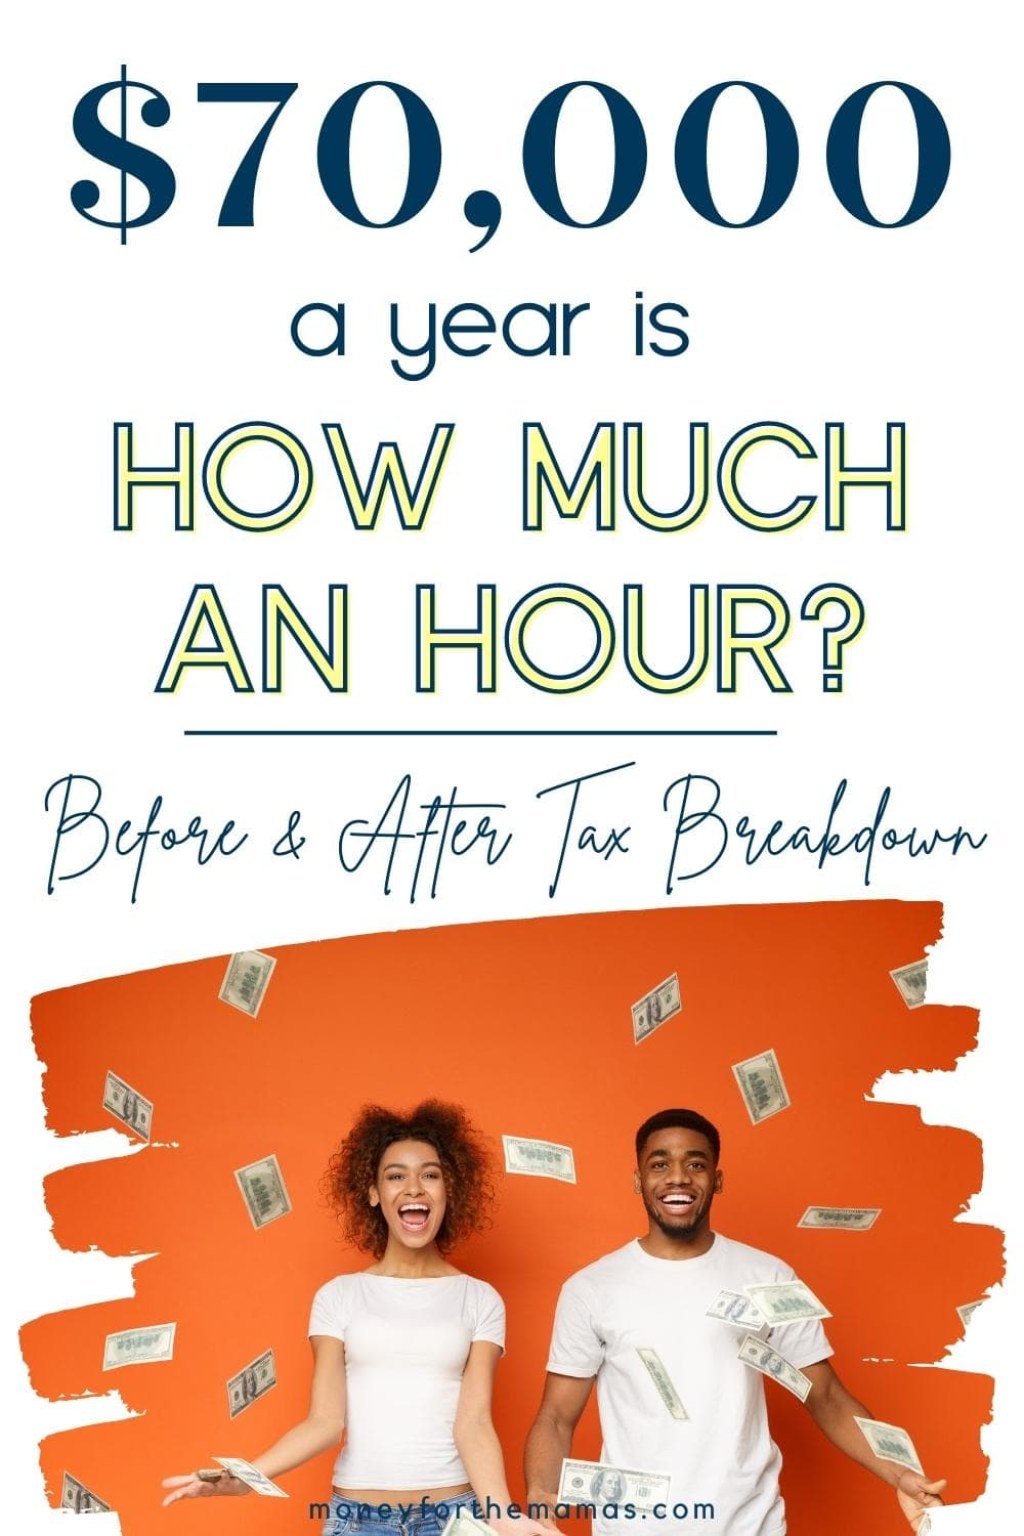 k a year is how much an hour before amp after tax breakdown